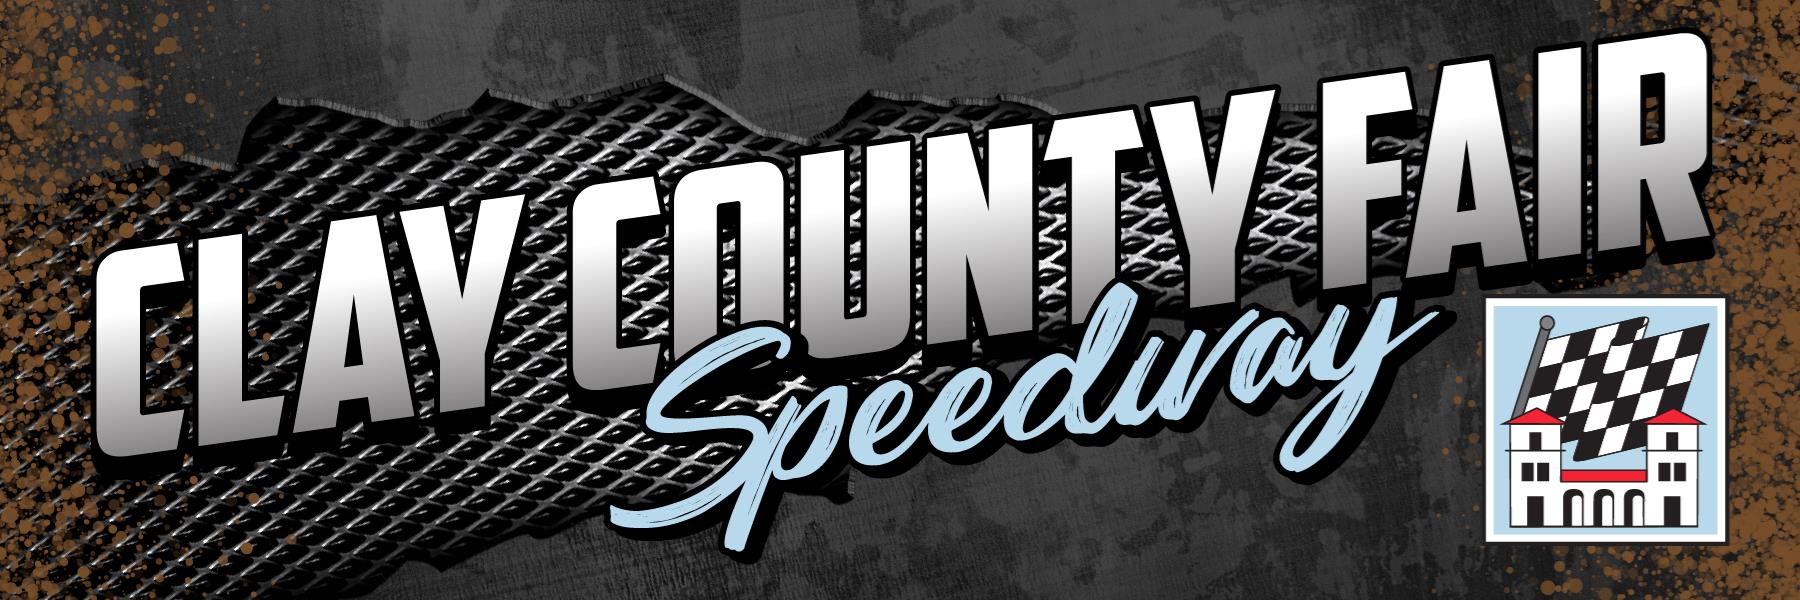 9/14/2021 - Clay County Fair Speedway